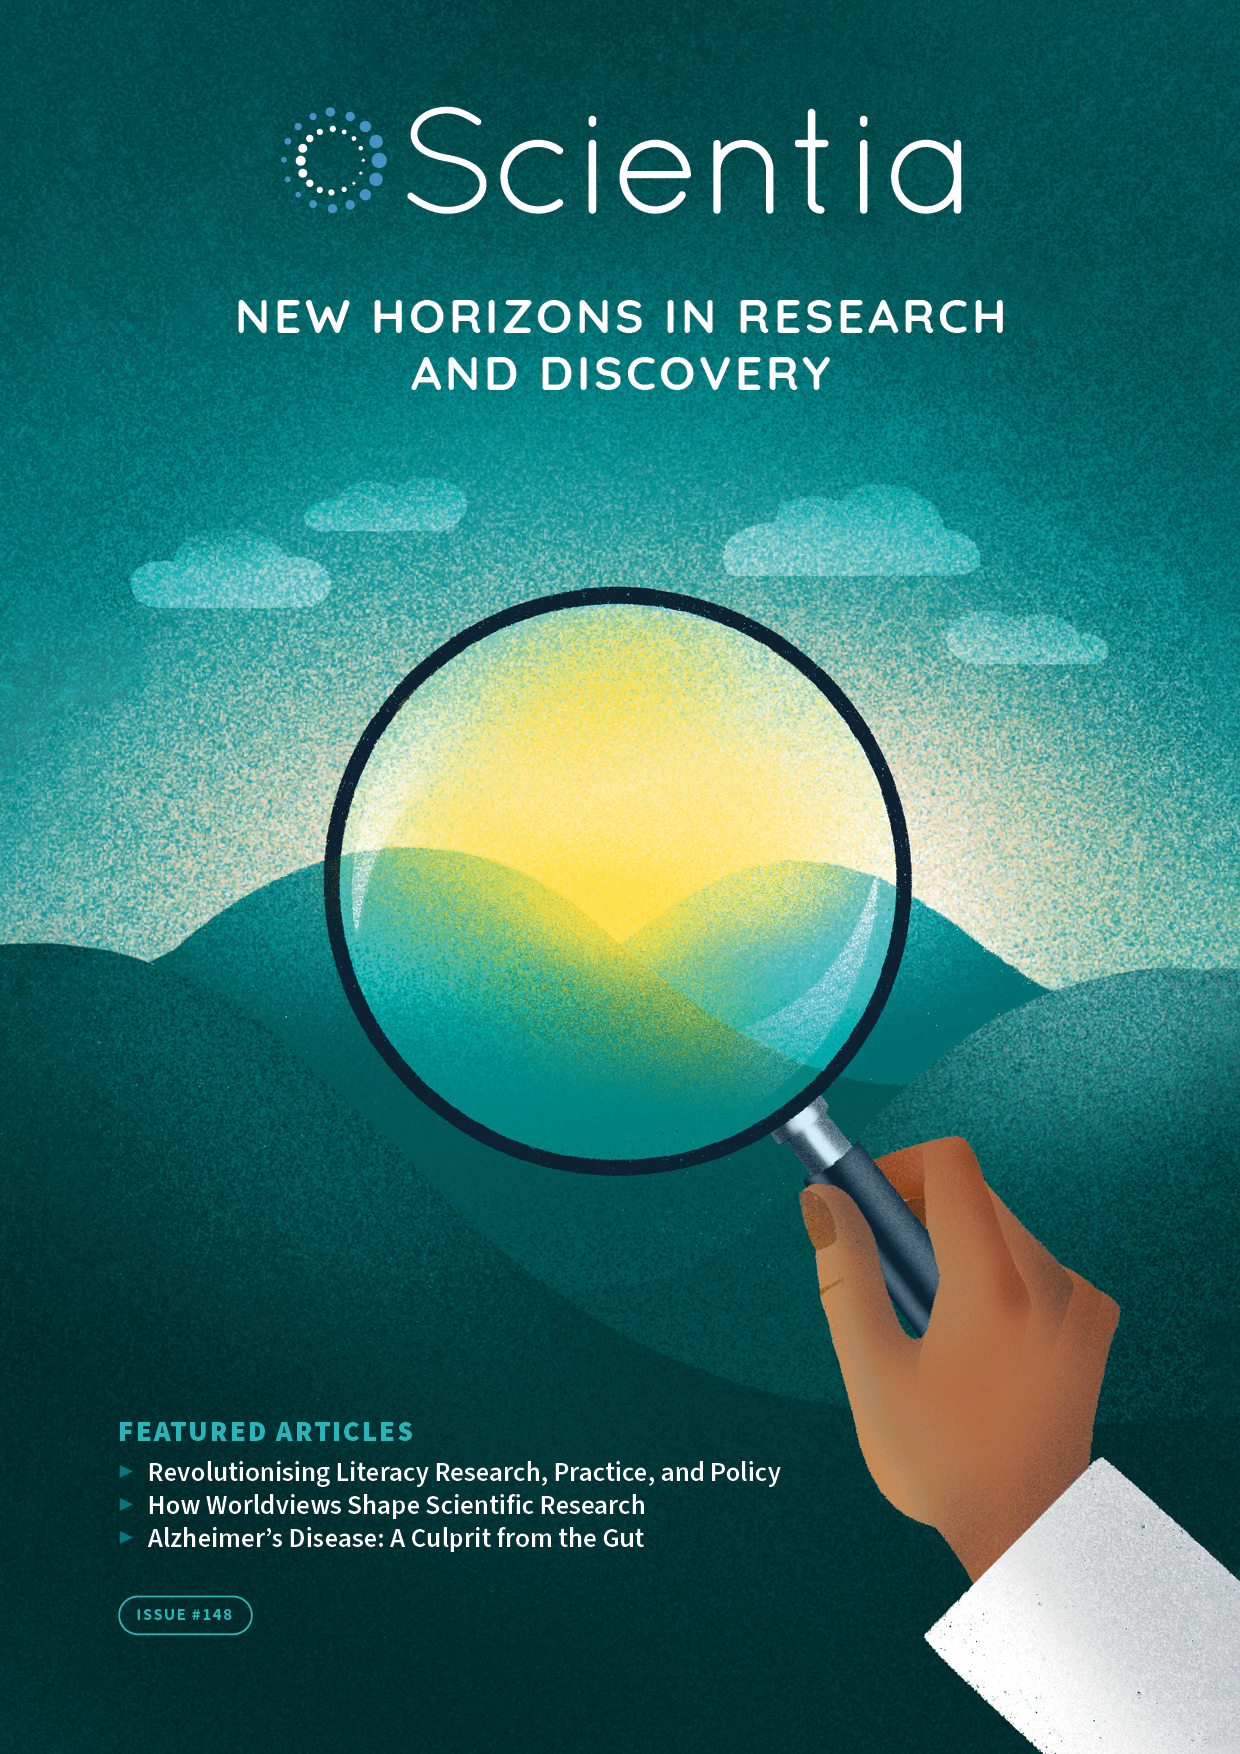 Scientia Issue #148 | New Horizons in Research and Discovery